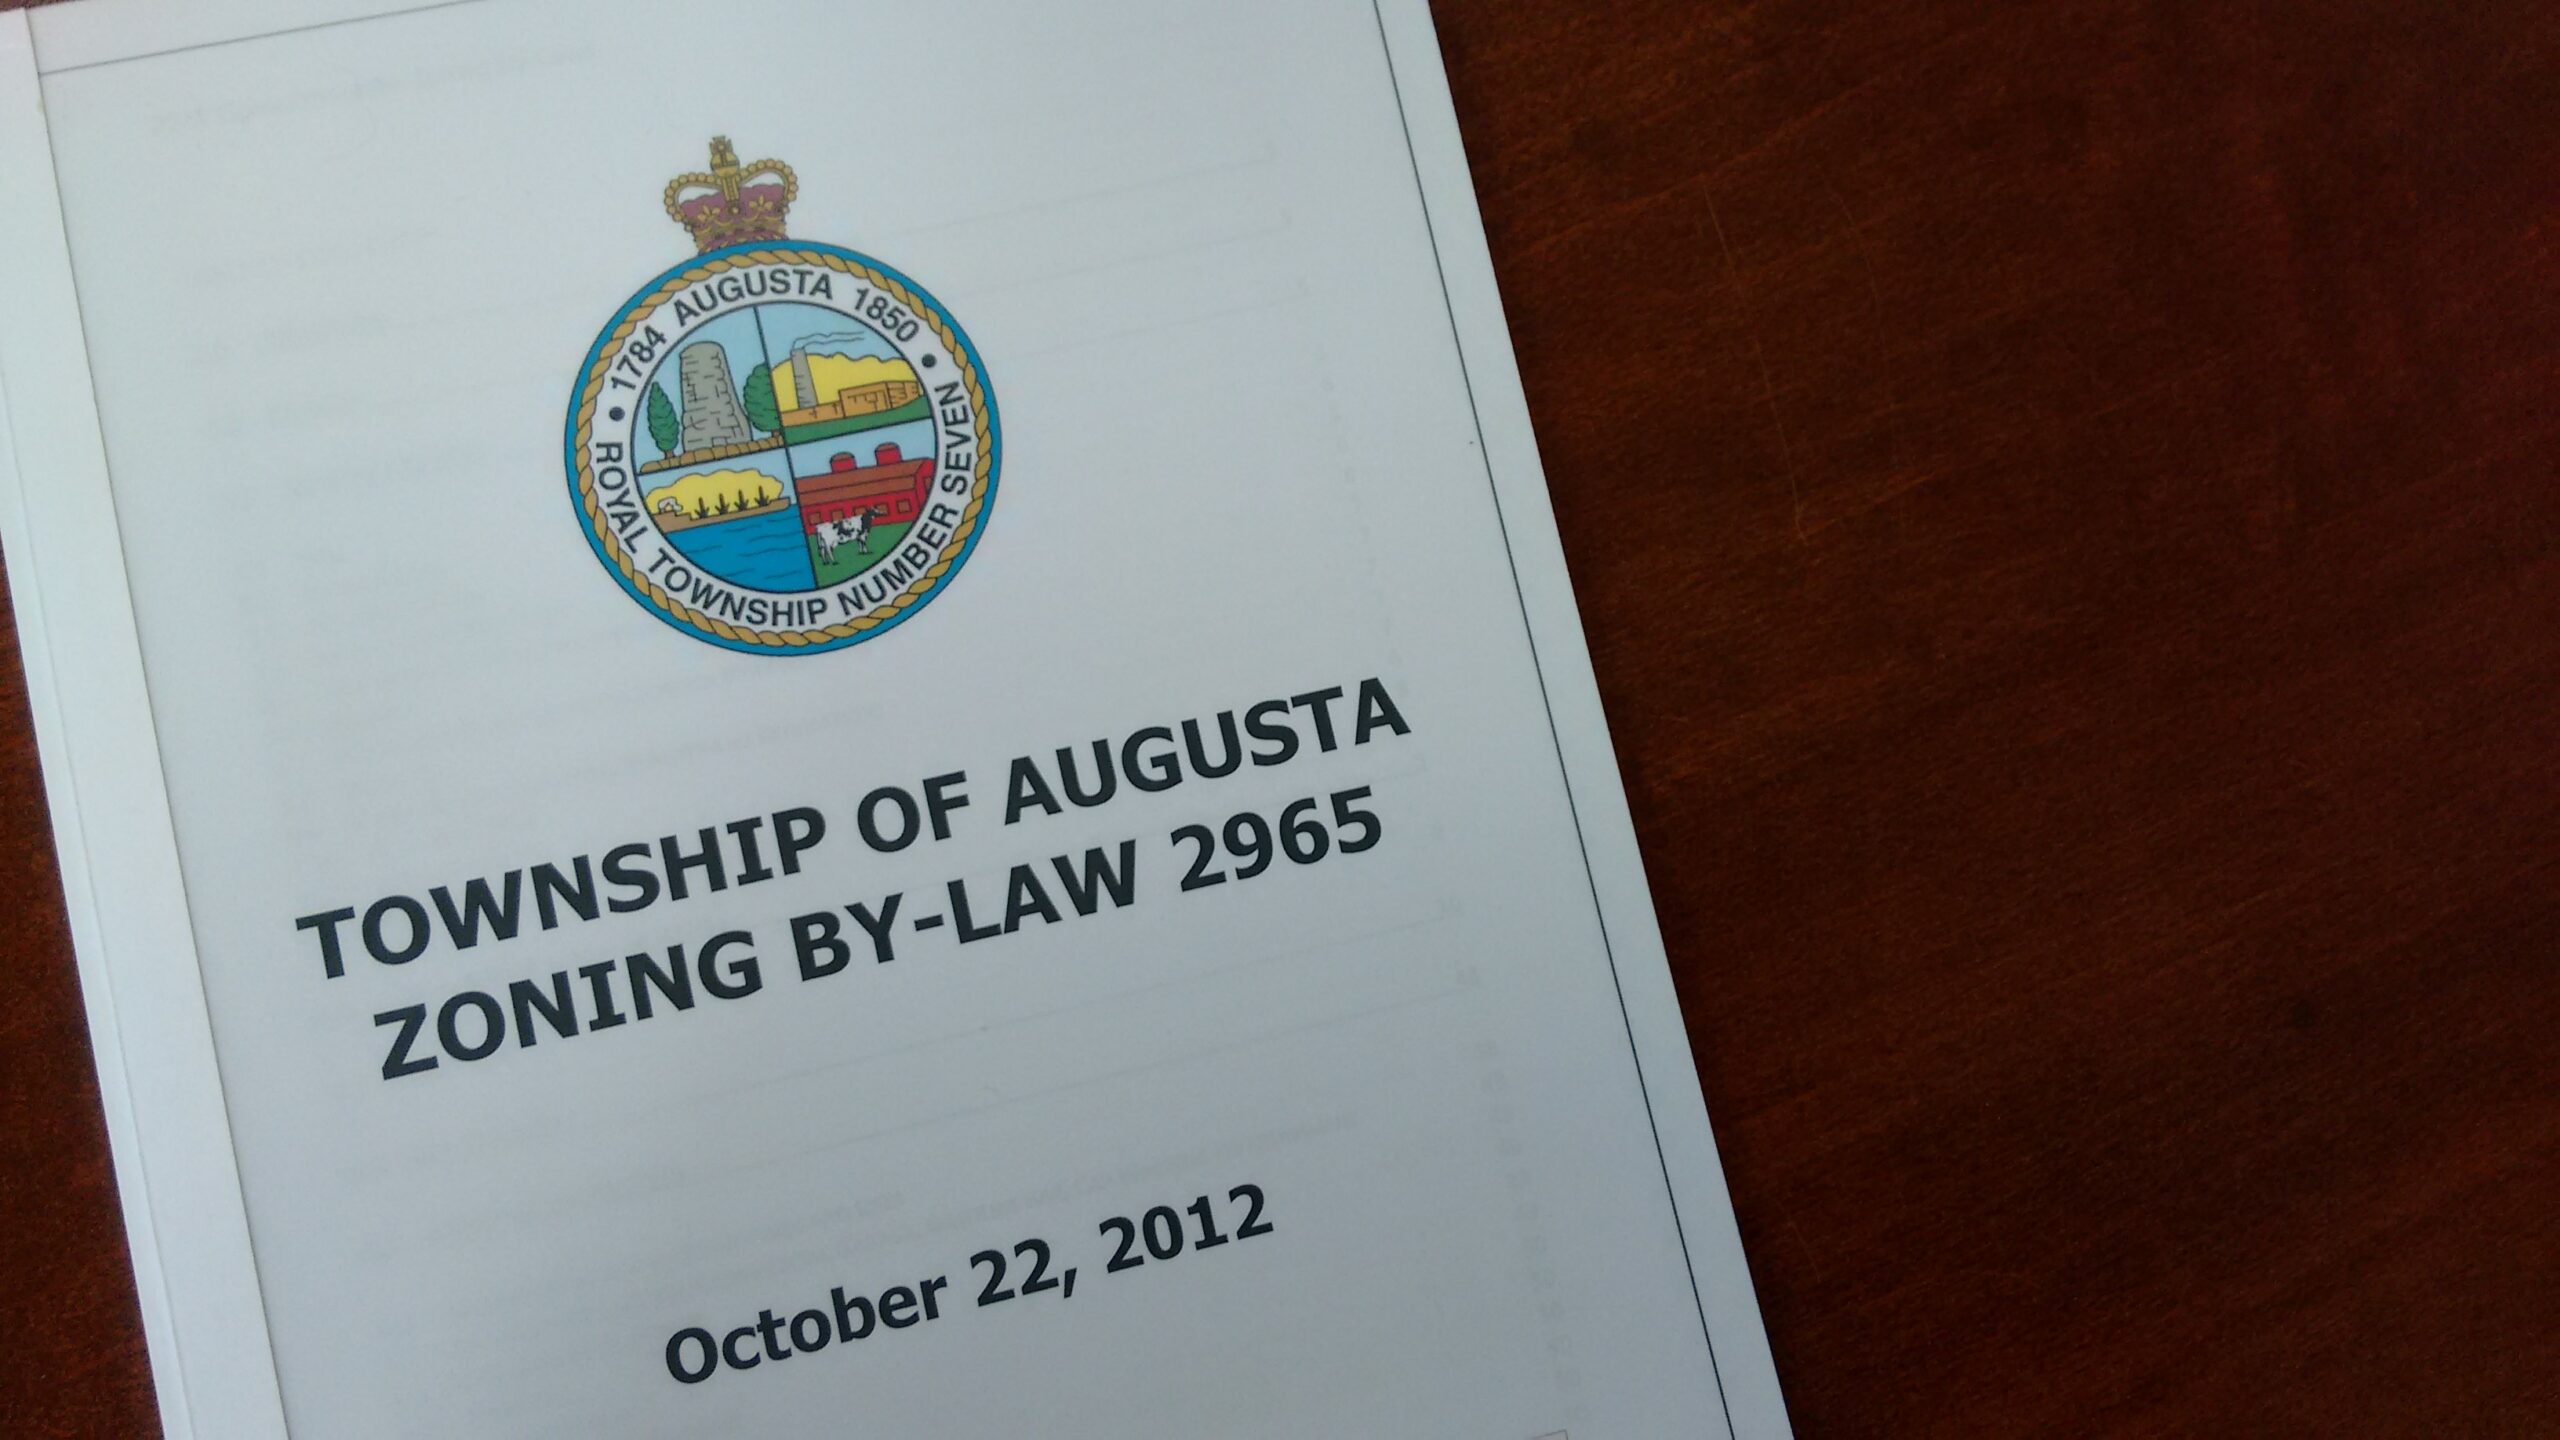 image of the cover of the township of augusta zoning by-law